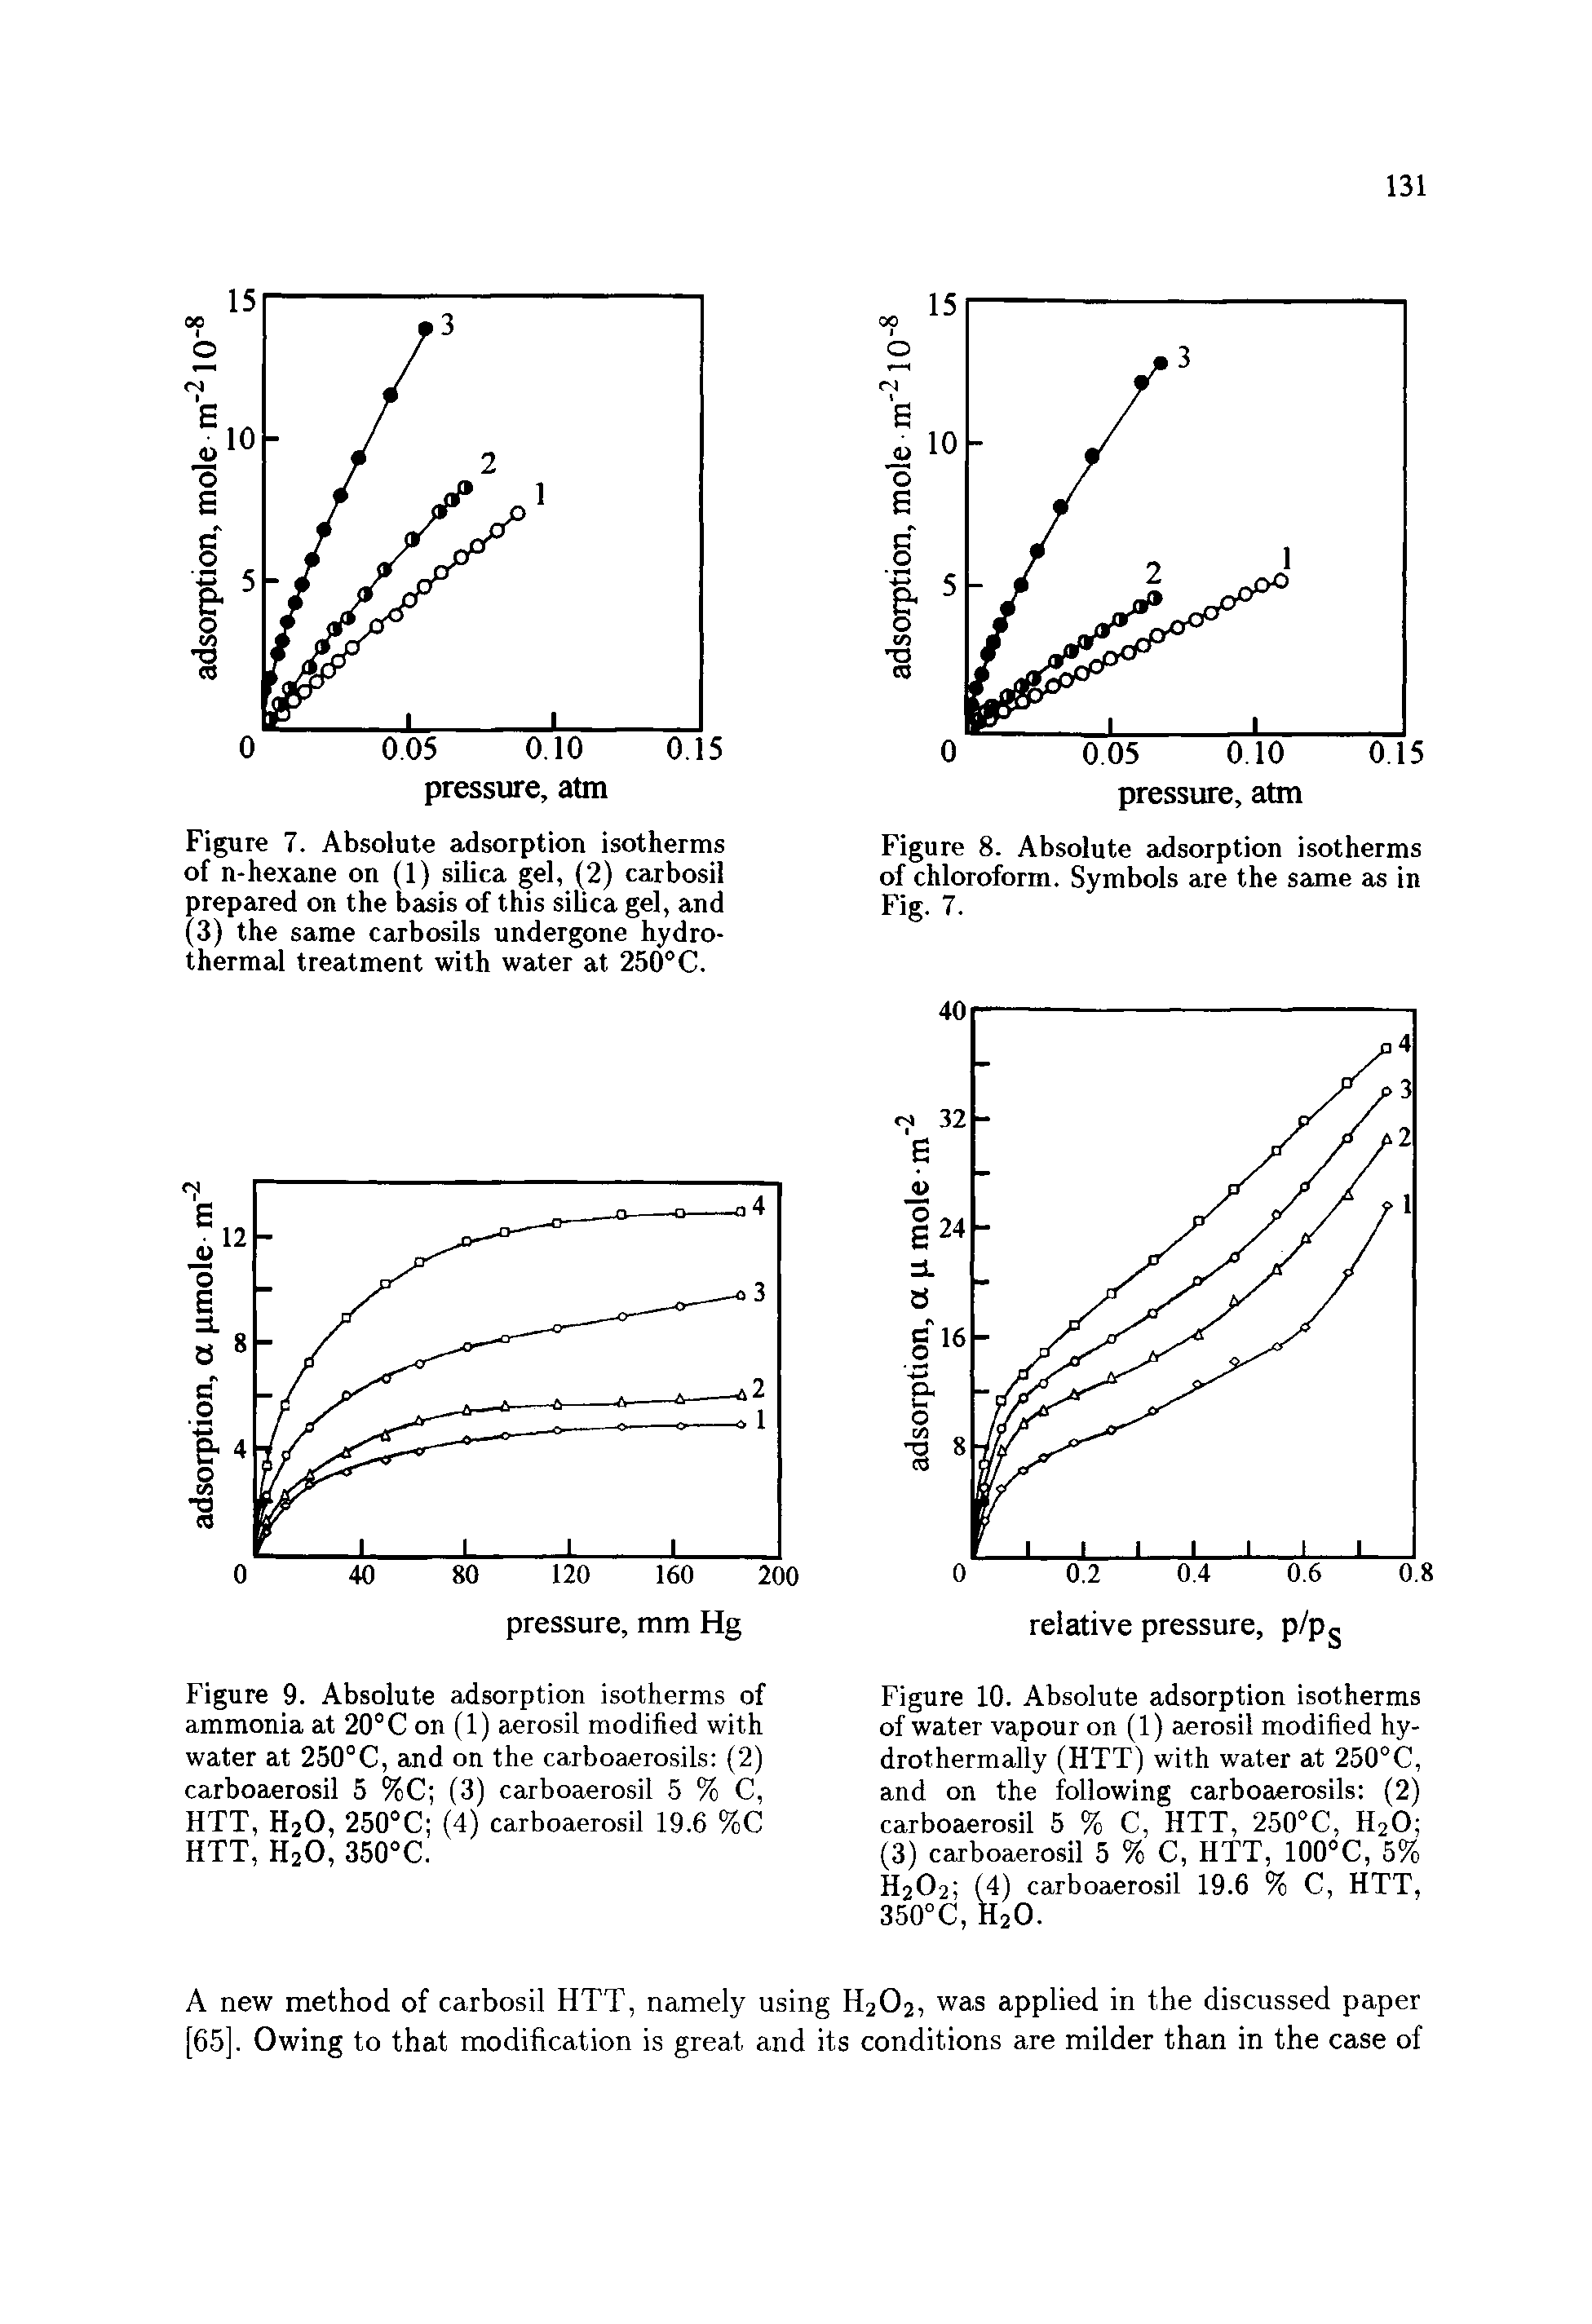 Figure 10. Absolute adsorption isotherms of water vapour on (1) aerosil modified hy-drothermally (HTT) with water at 250°C, and on the following carboaerosils (2) carboaerosil 5 % C, HTT, 250°C, H2O (3) carboaerosil 5 % C, HTT, 100°C, 5% H2O2 (4) carboaerosil 19.6 % C, HTT, 350°C, H2O.